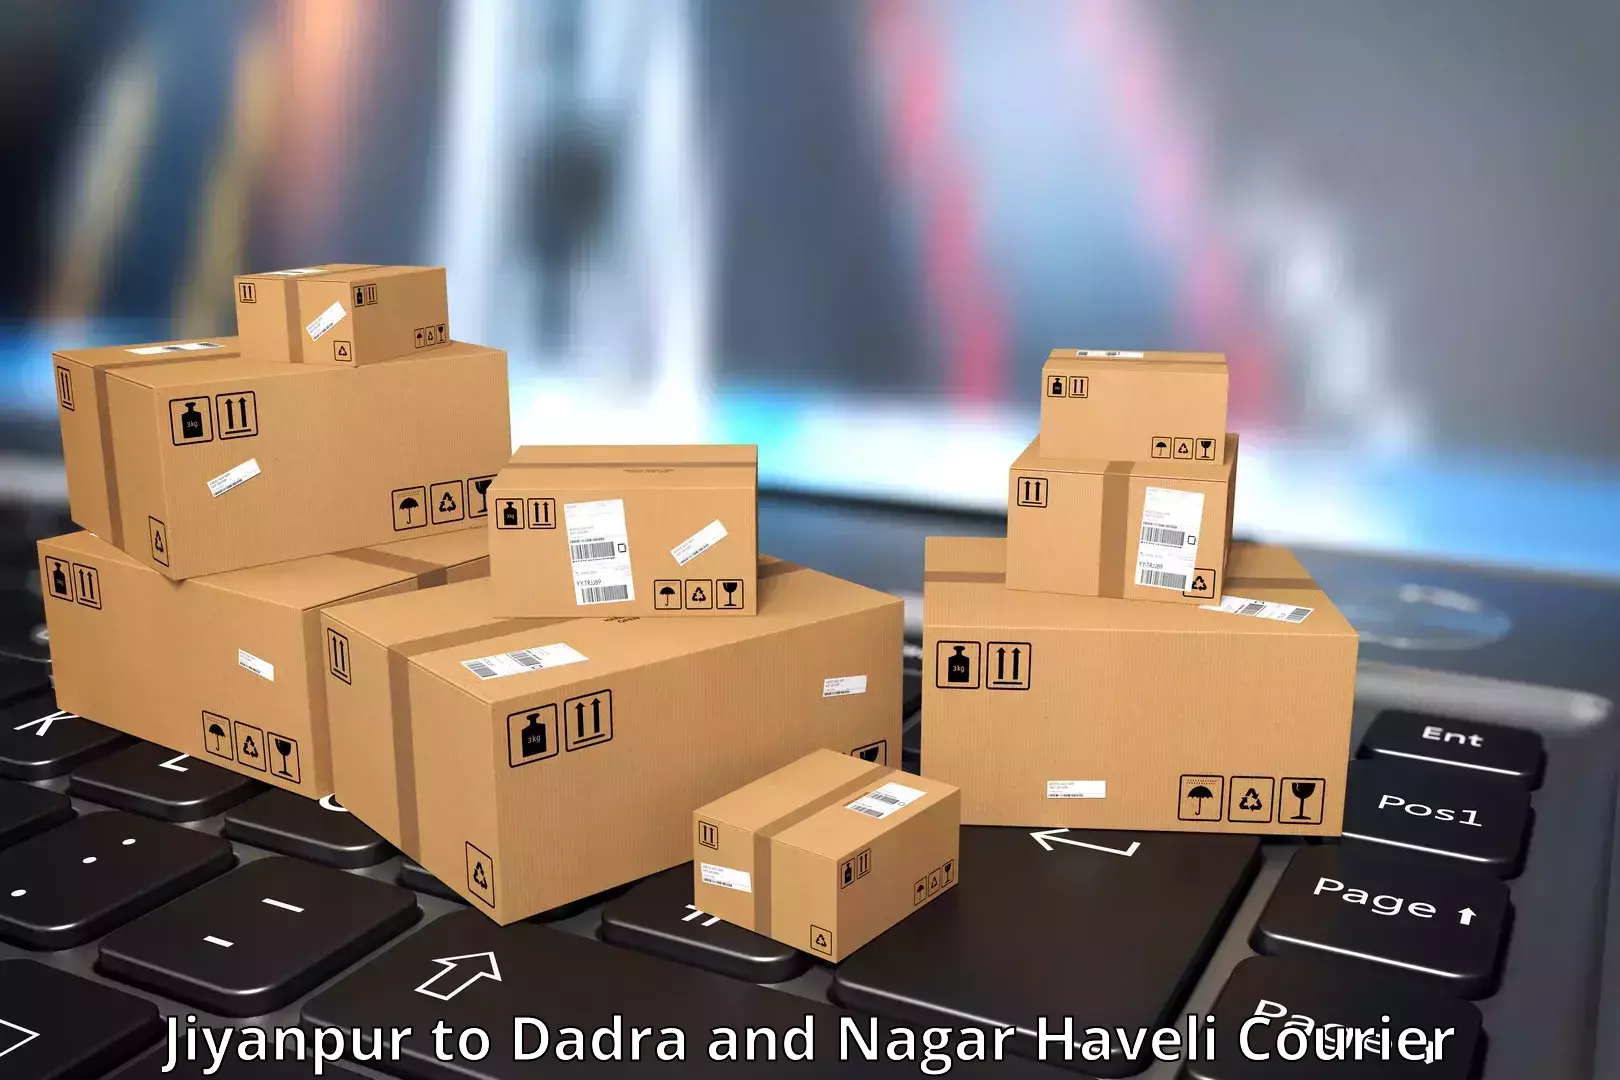 Versatile courier offerings Jiyanpur to Dadra and Nagar Haveli